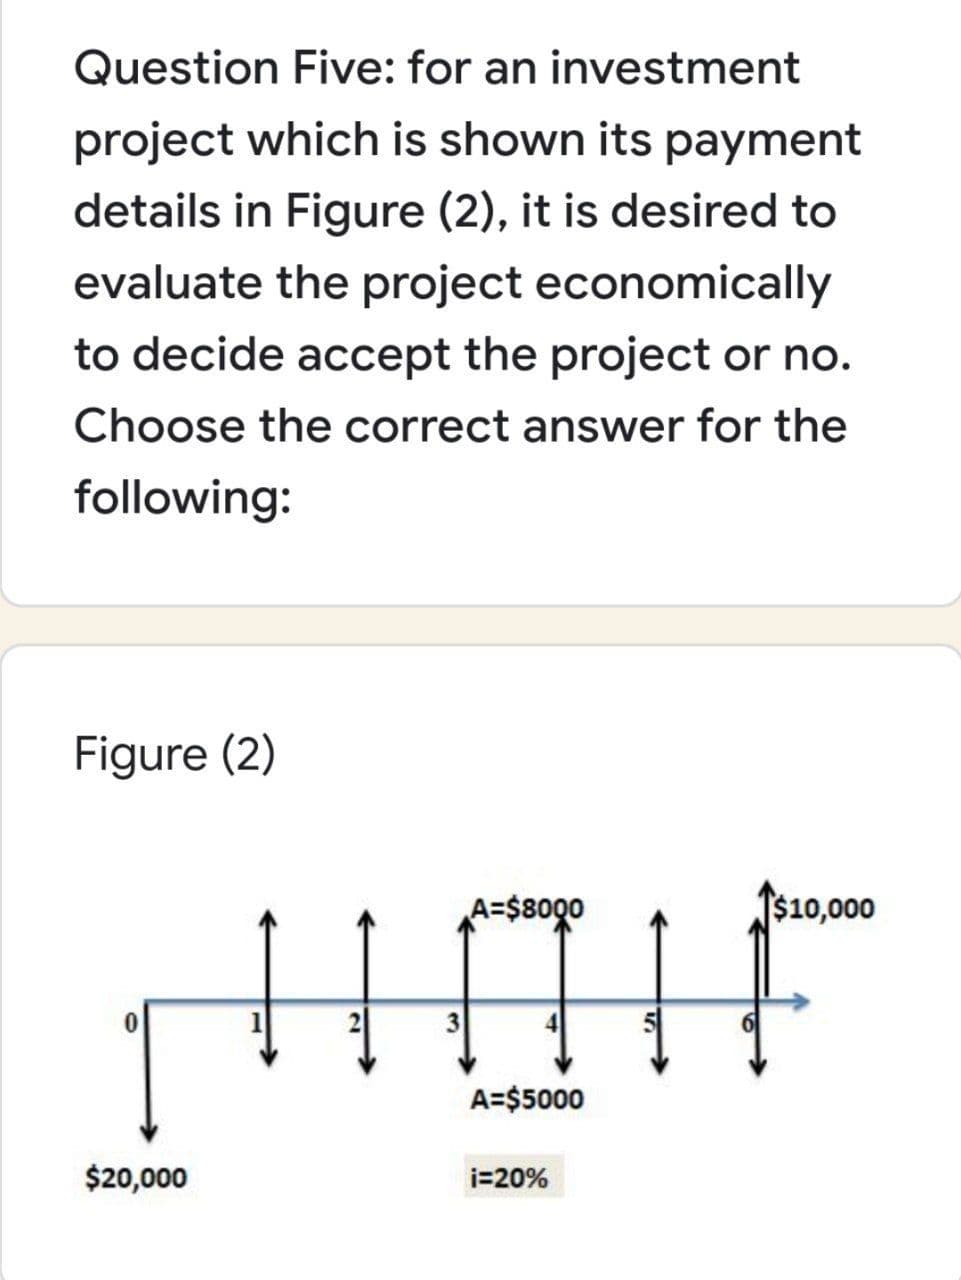 Question Five: for an investment
project which is shown its payment
details in Figure (2), it is desired to
evaluate the project economically
to decide accept the project or no.
Choose the correct answer for the
following:
Figure (2)
A=$8000
HIGHF
3
A=$5000
i=20%
$20,000
$10,000